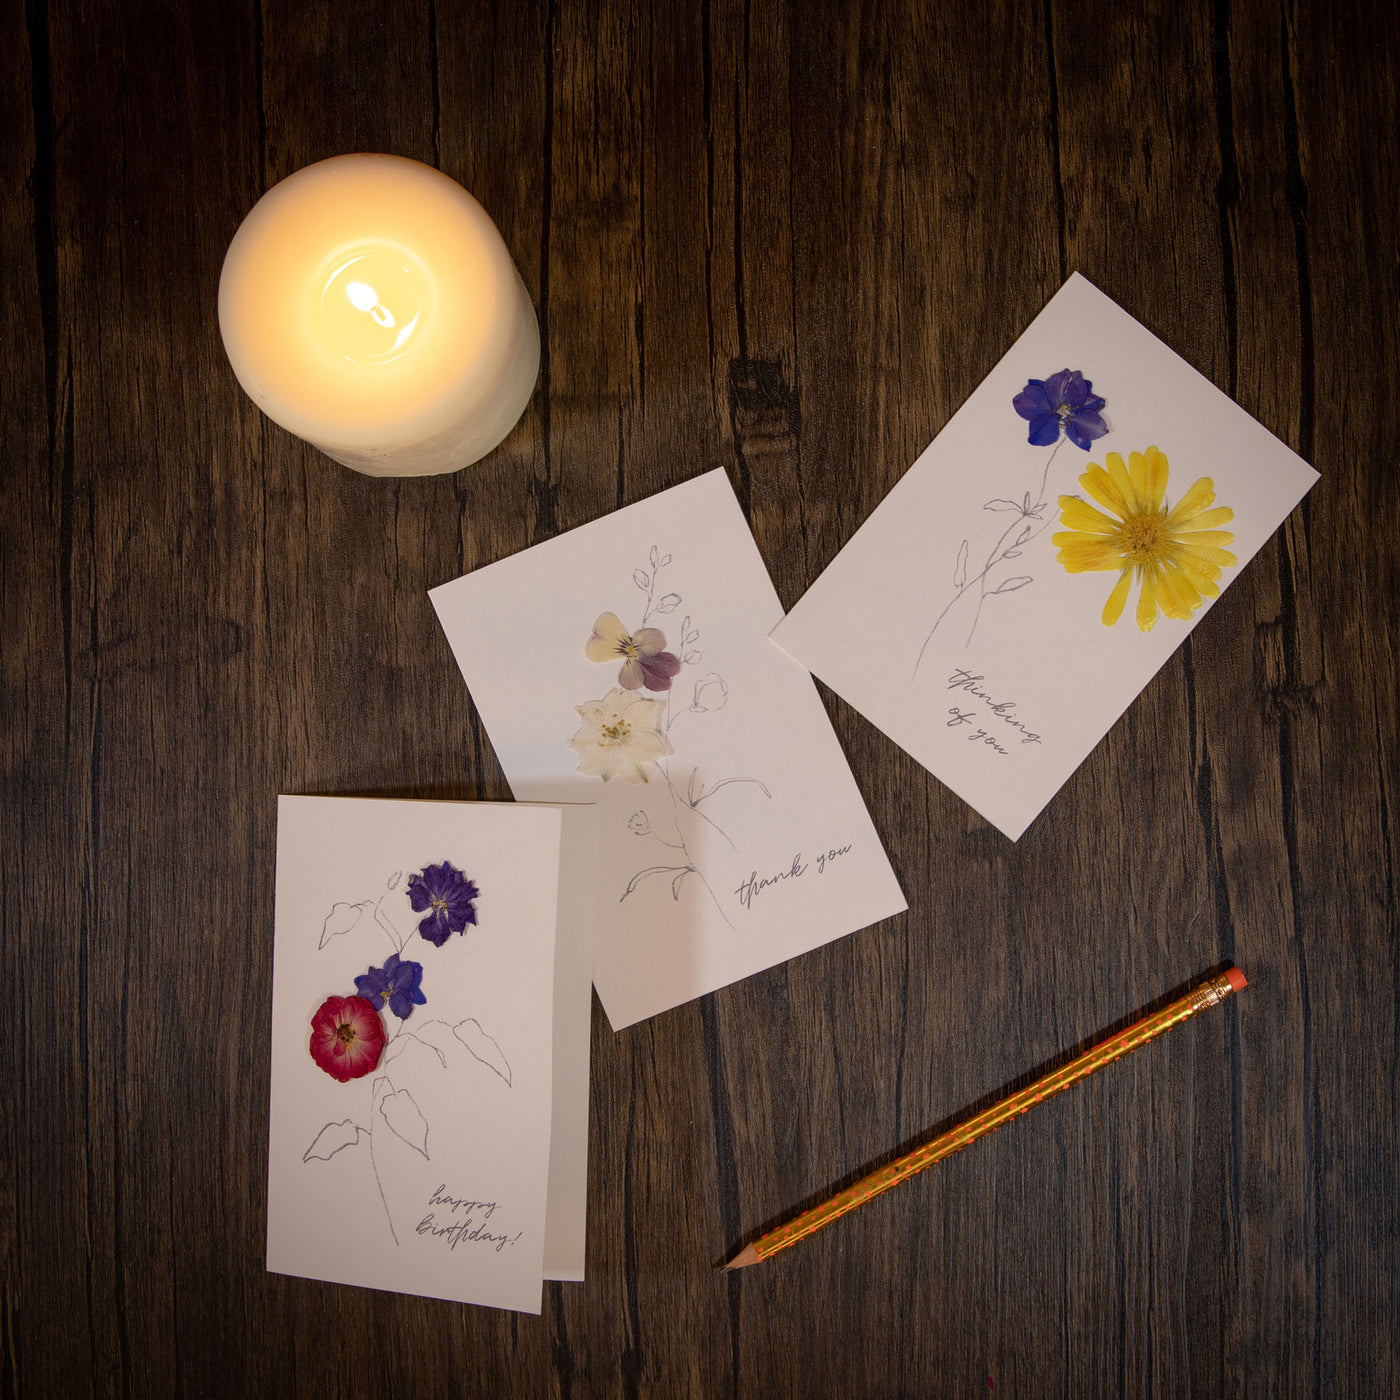 Thank You - Verbena Pressed Floral Stationery